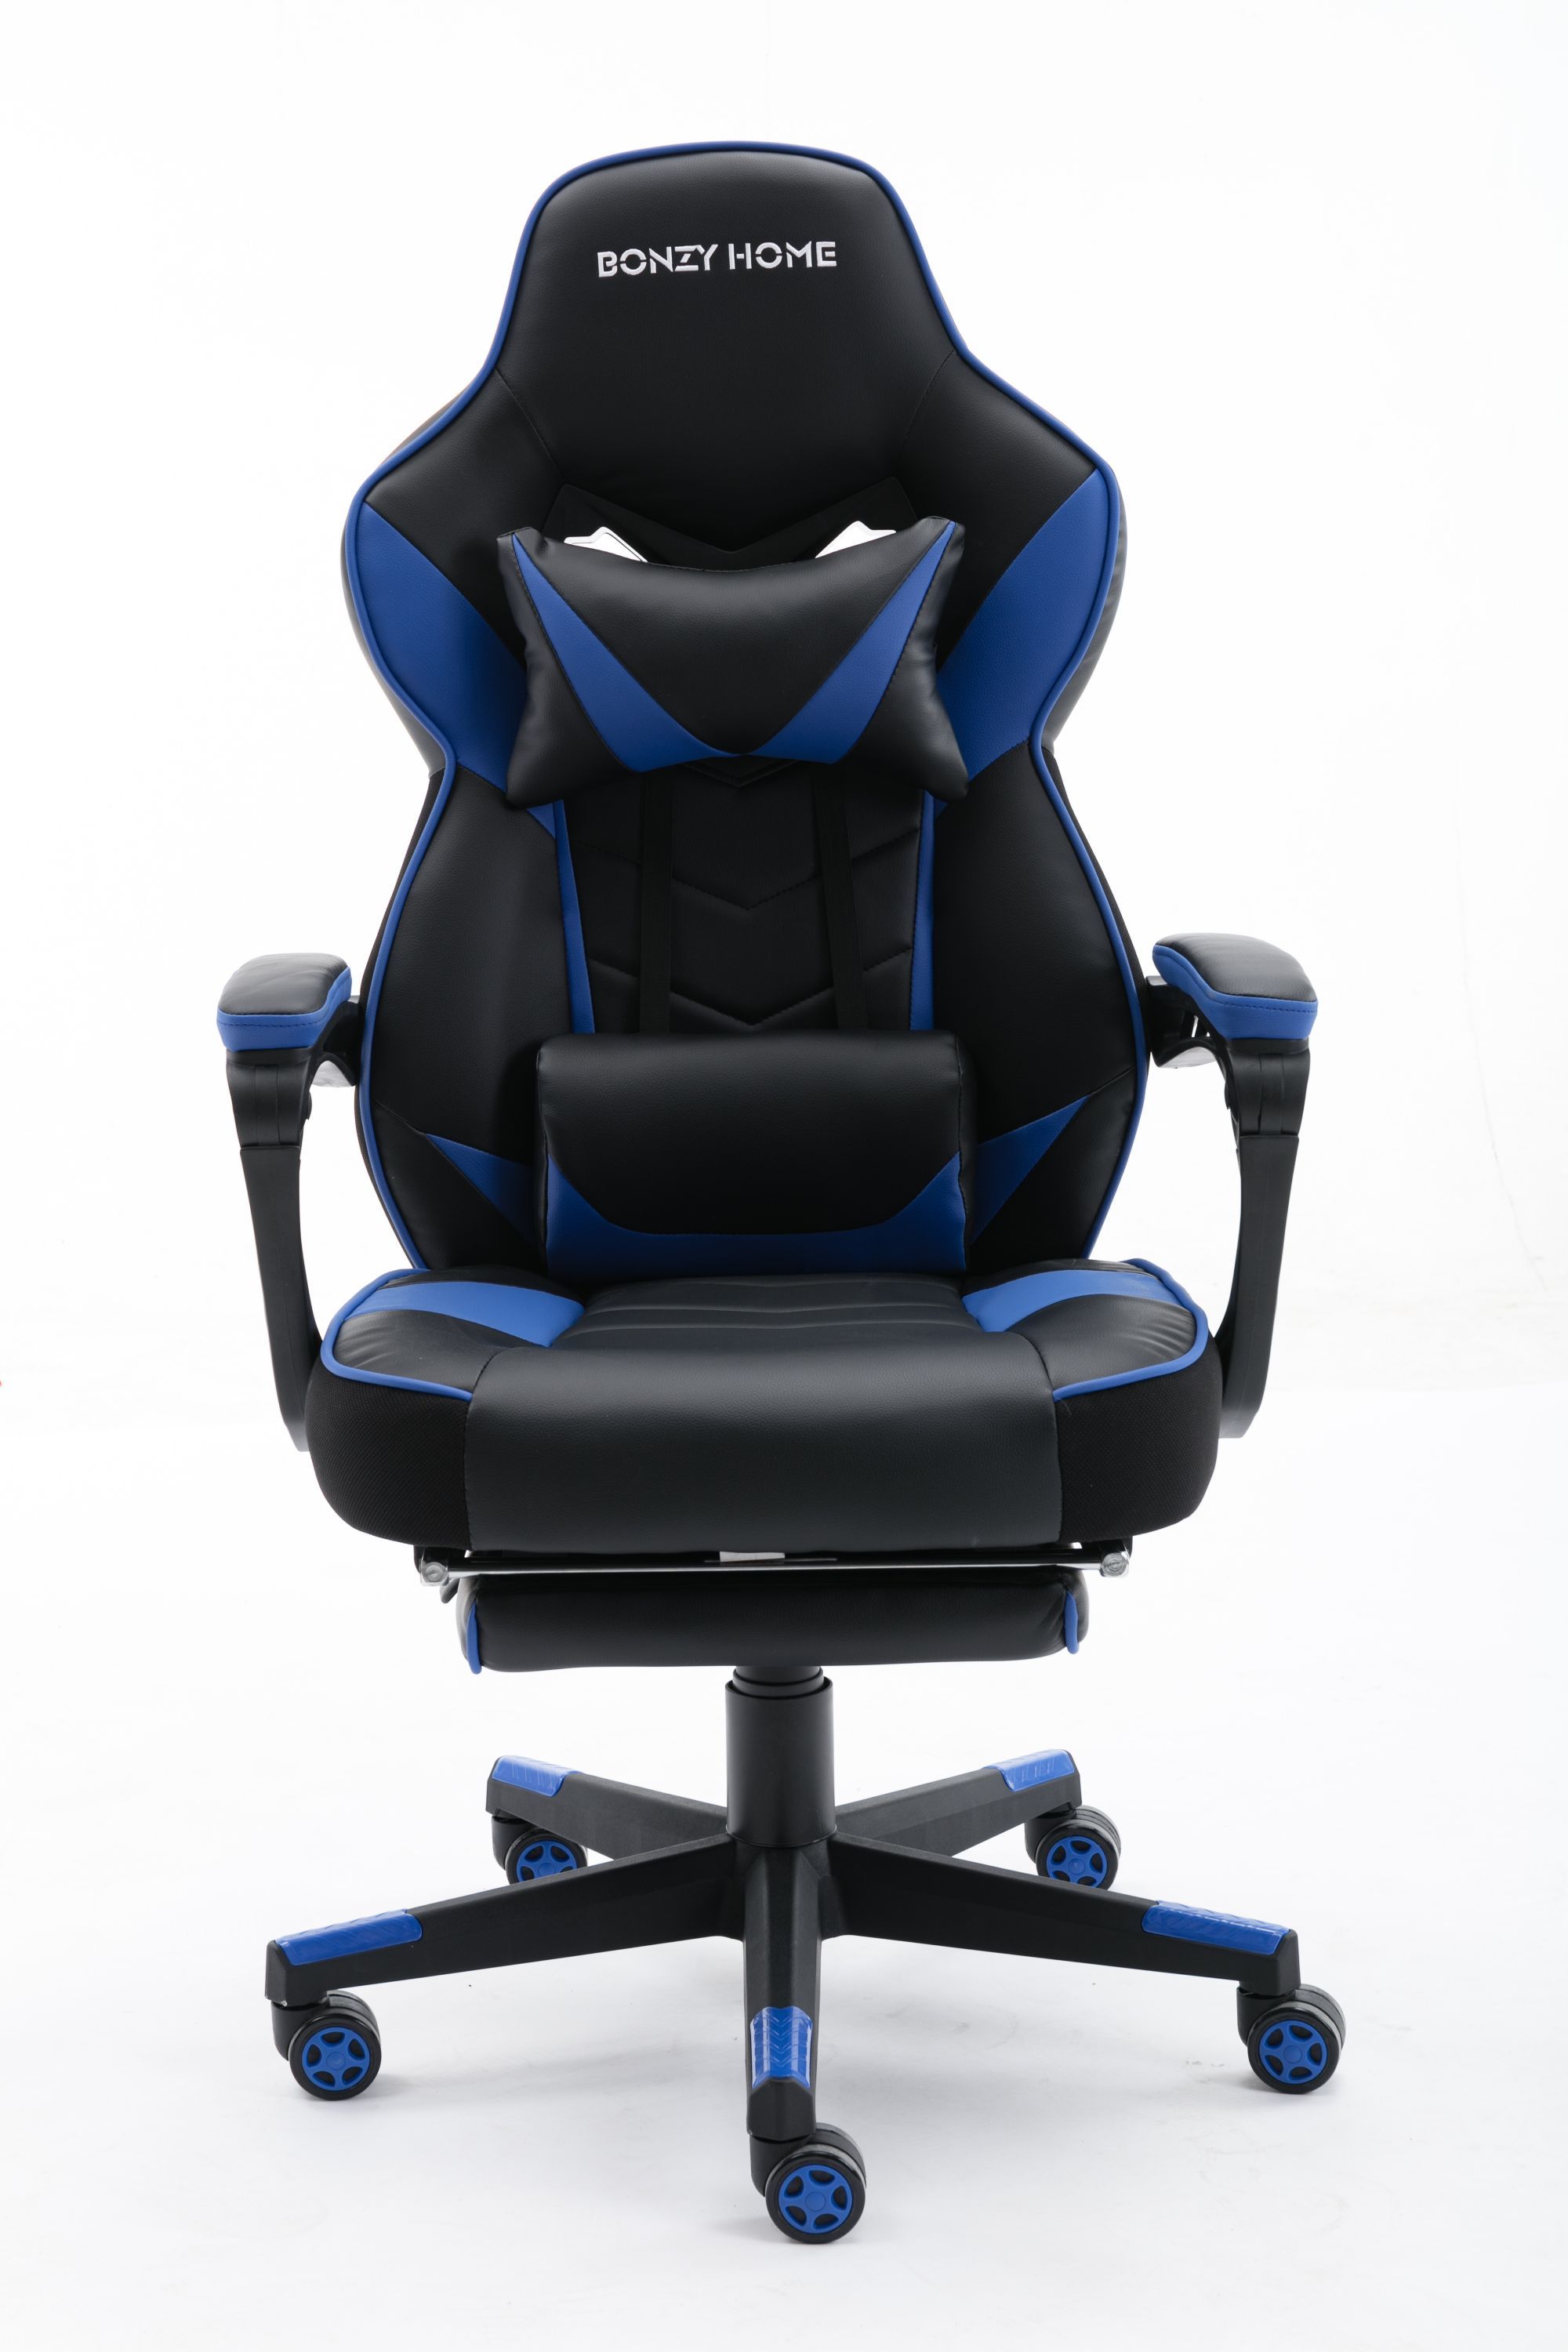 Details about   Gaming Chair High Back Swivel Racing Ergonomic Recliner Office Computer Chair 